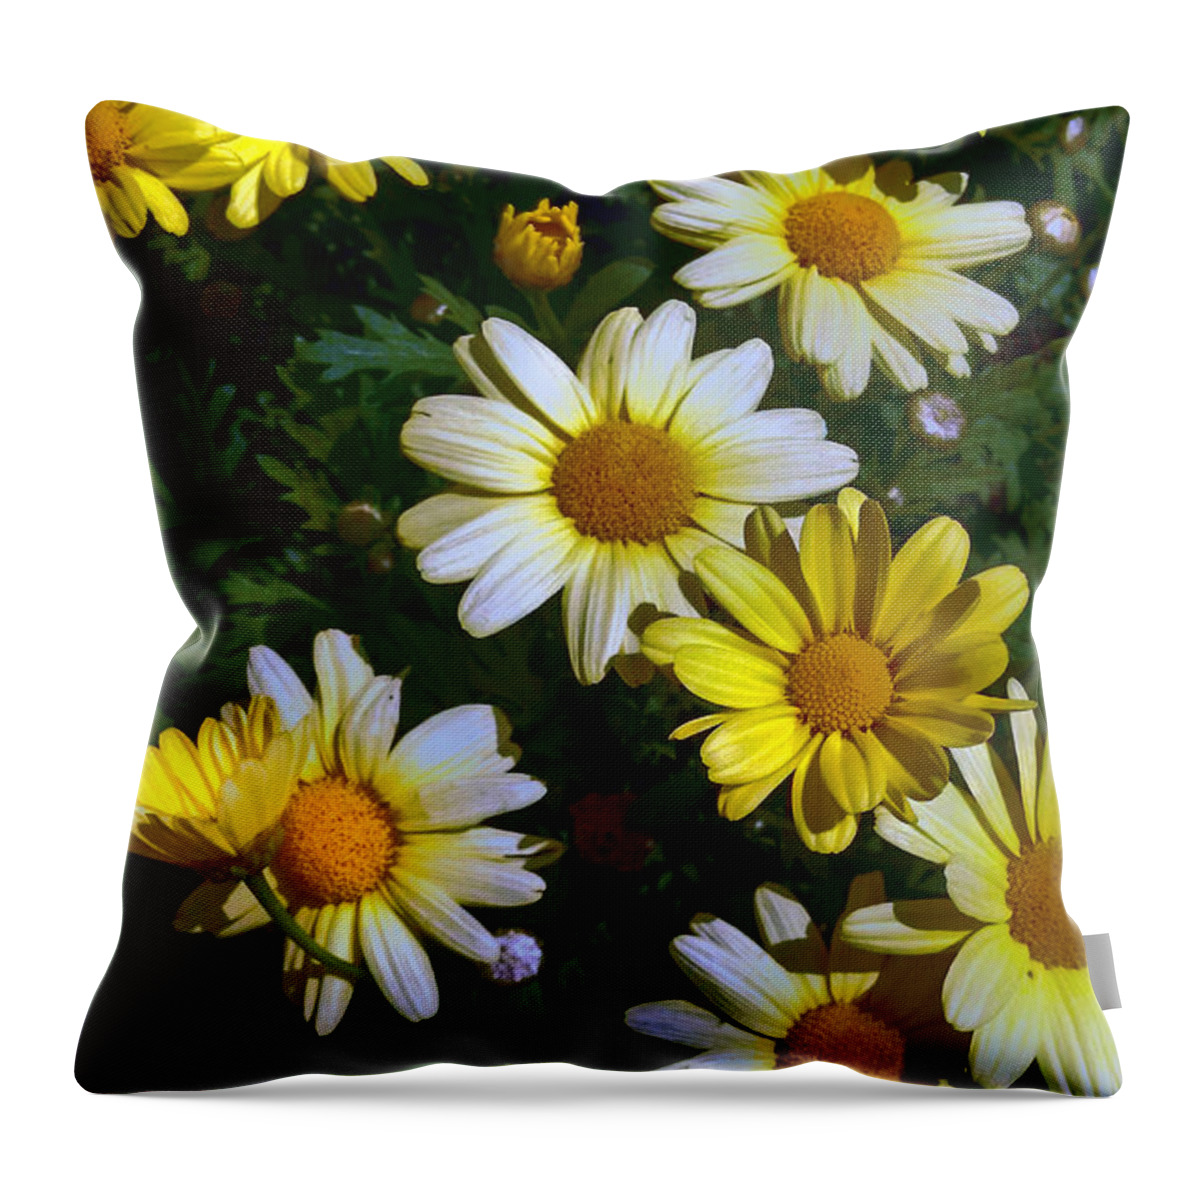 Donna Proctor Throw Pillow featuring the photograph Garden Delight by Donna Proctor